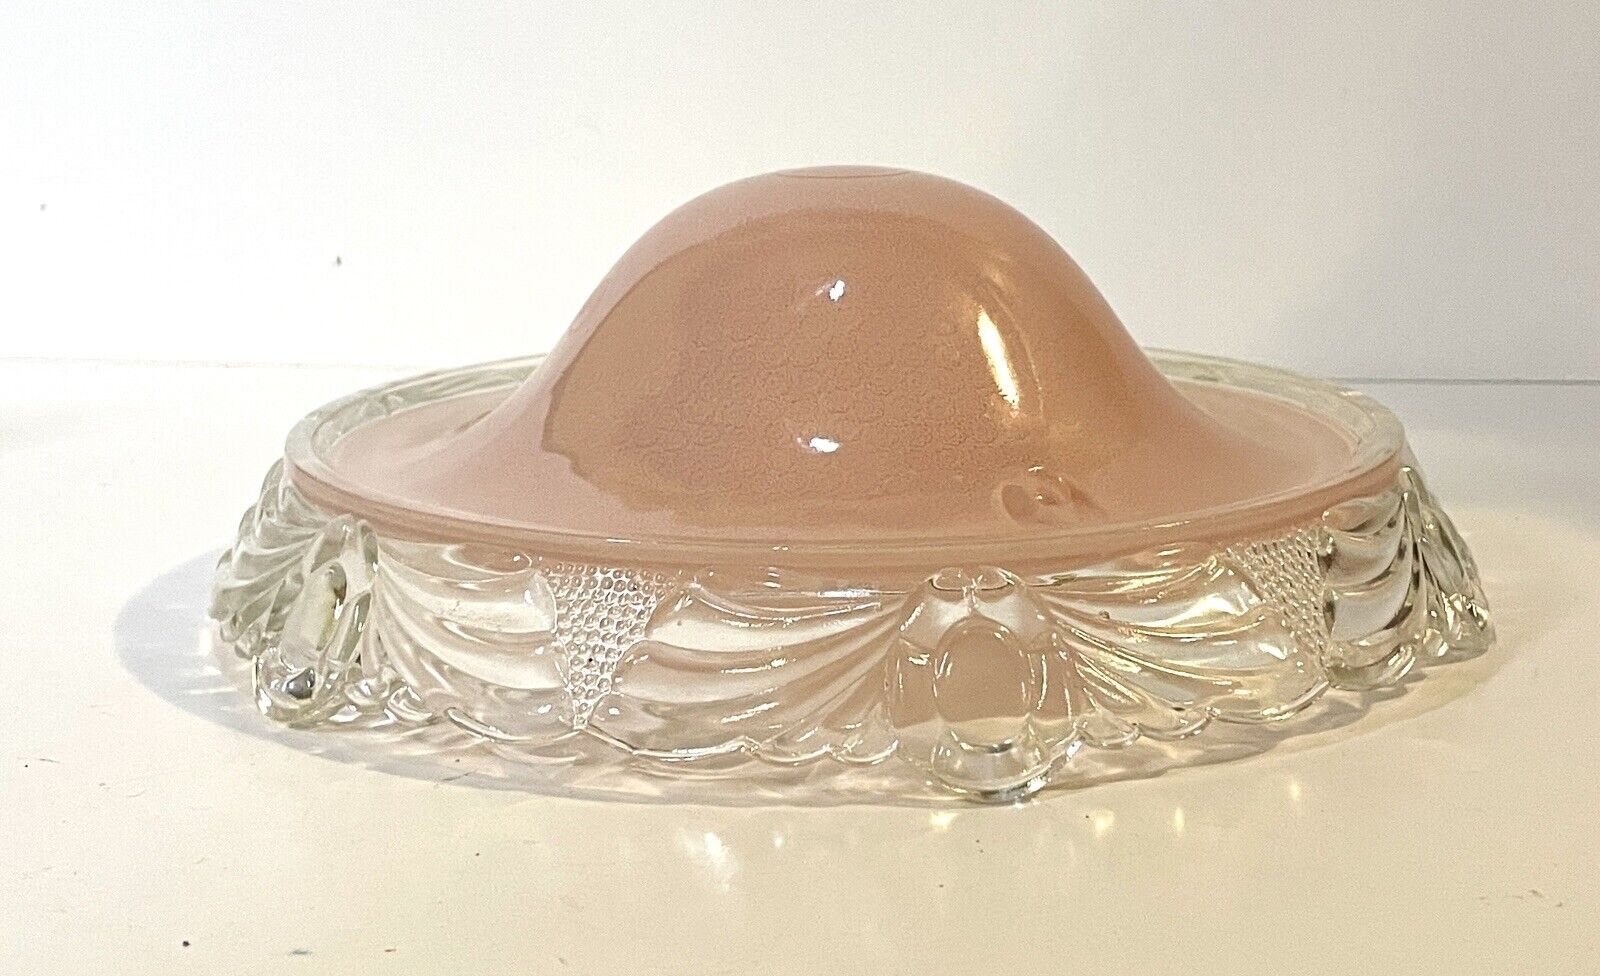 Vintage Hanging Lamp Pink & Clear Glass Shade With 3 Holes For Chain Attachment